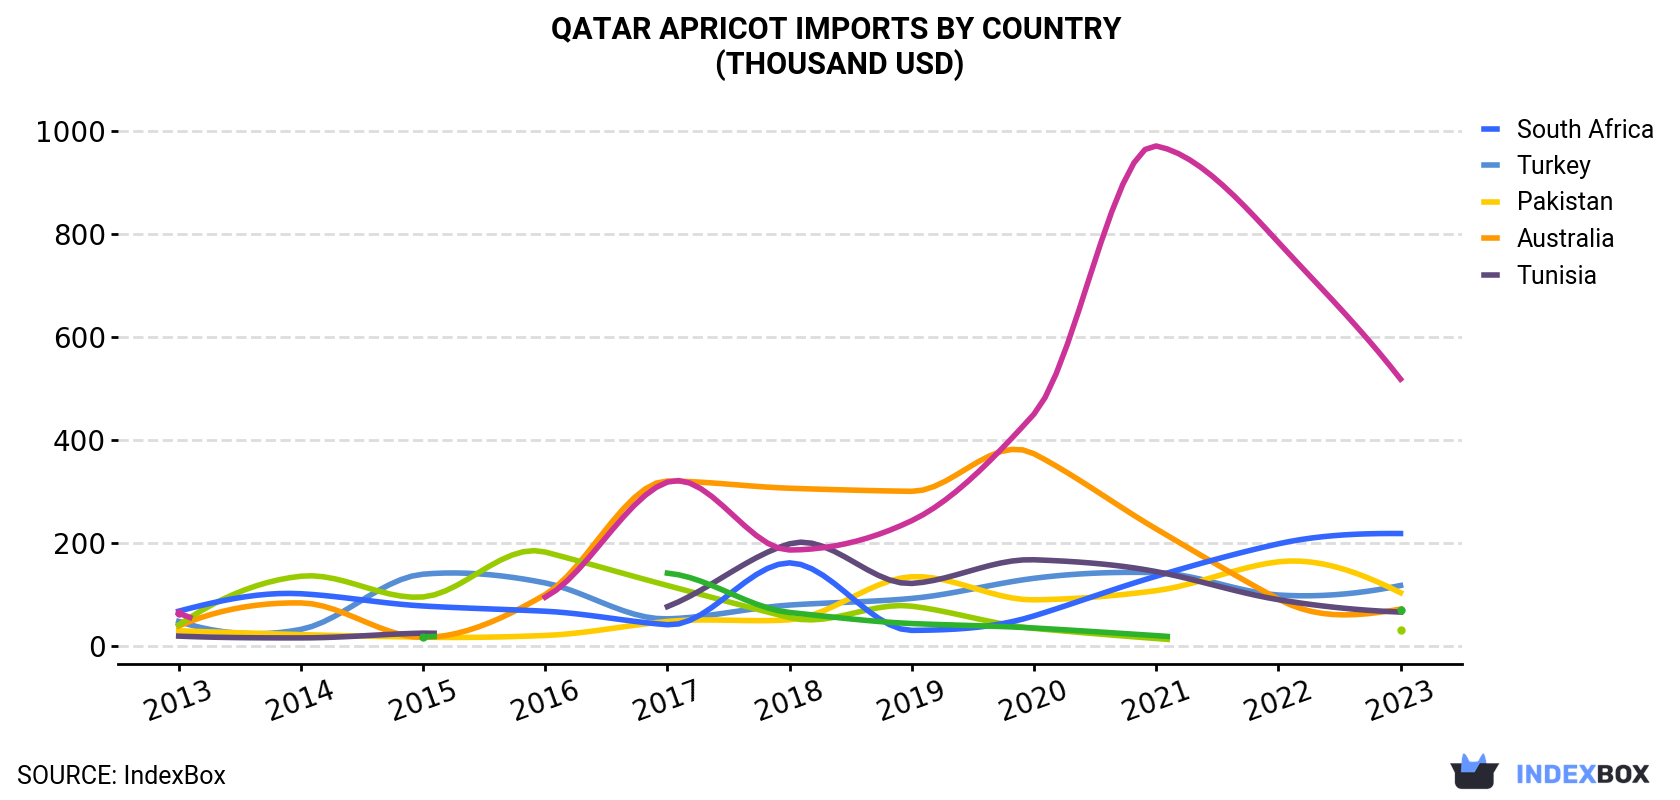 Qatar Apricot Imports By Country (Thousand USD)